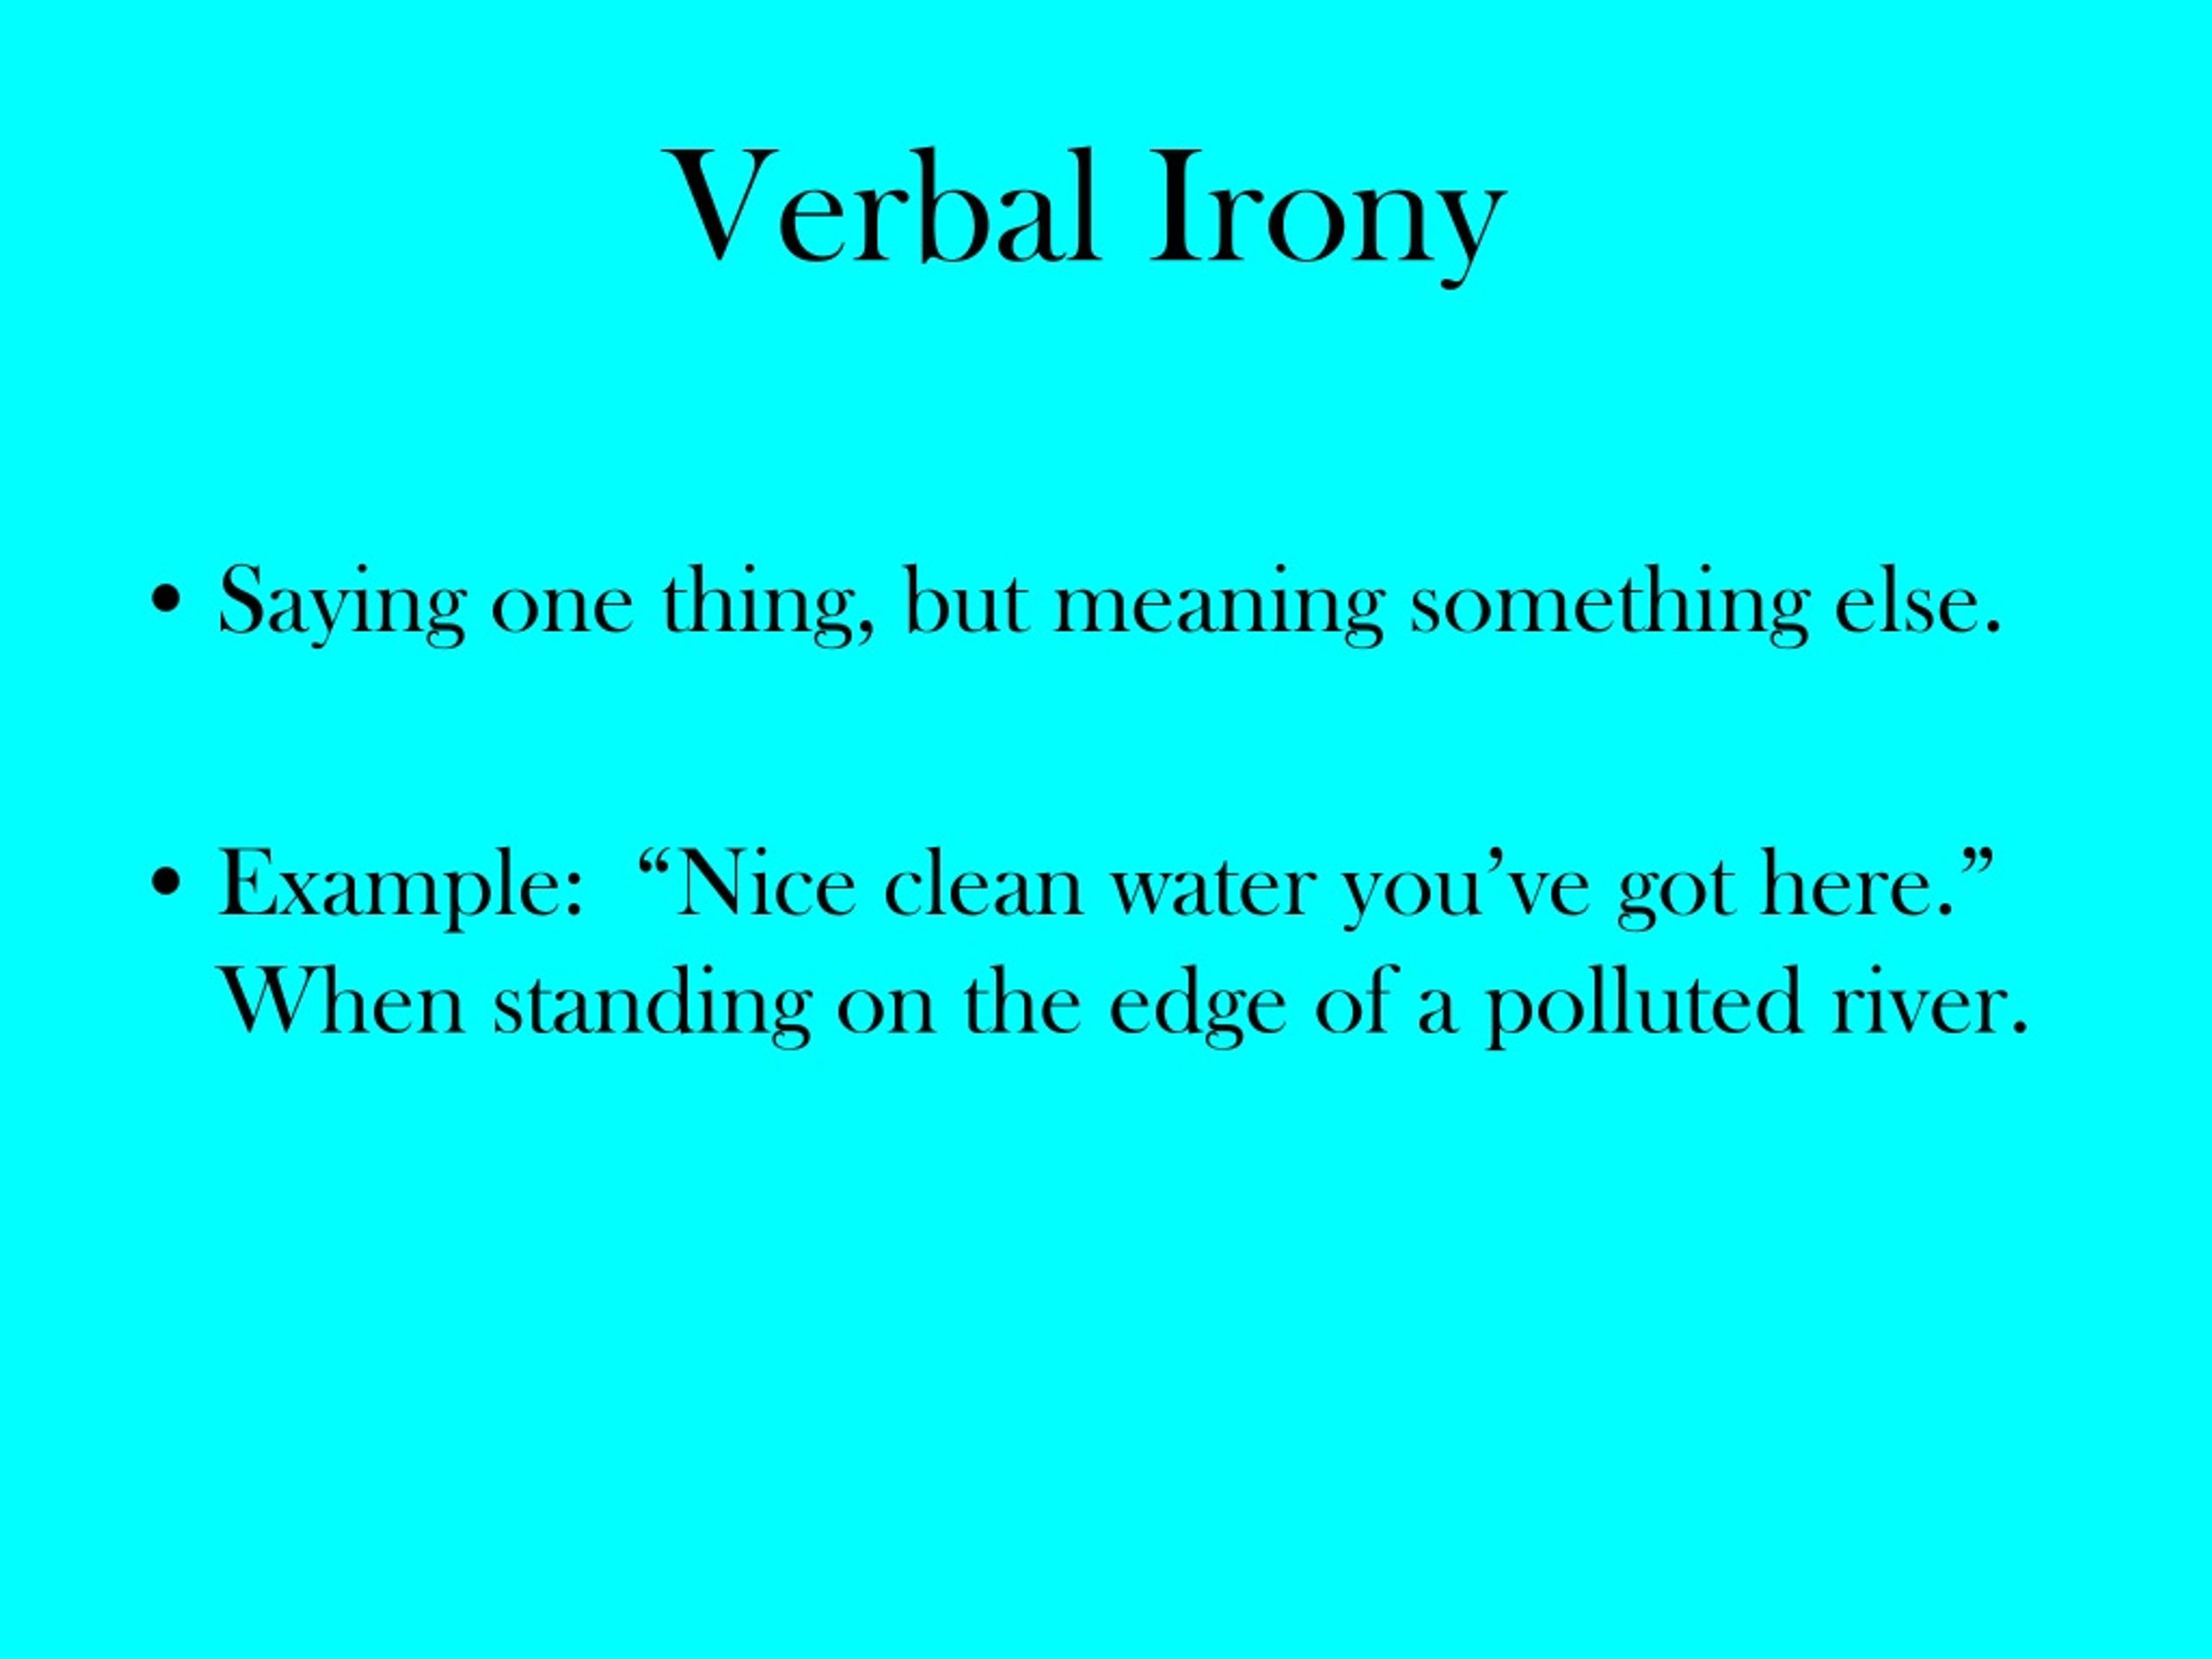 give an example of verbal irony